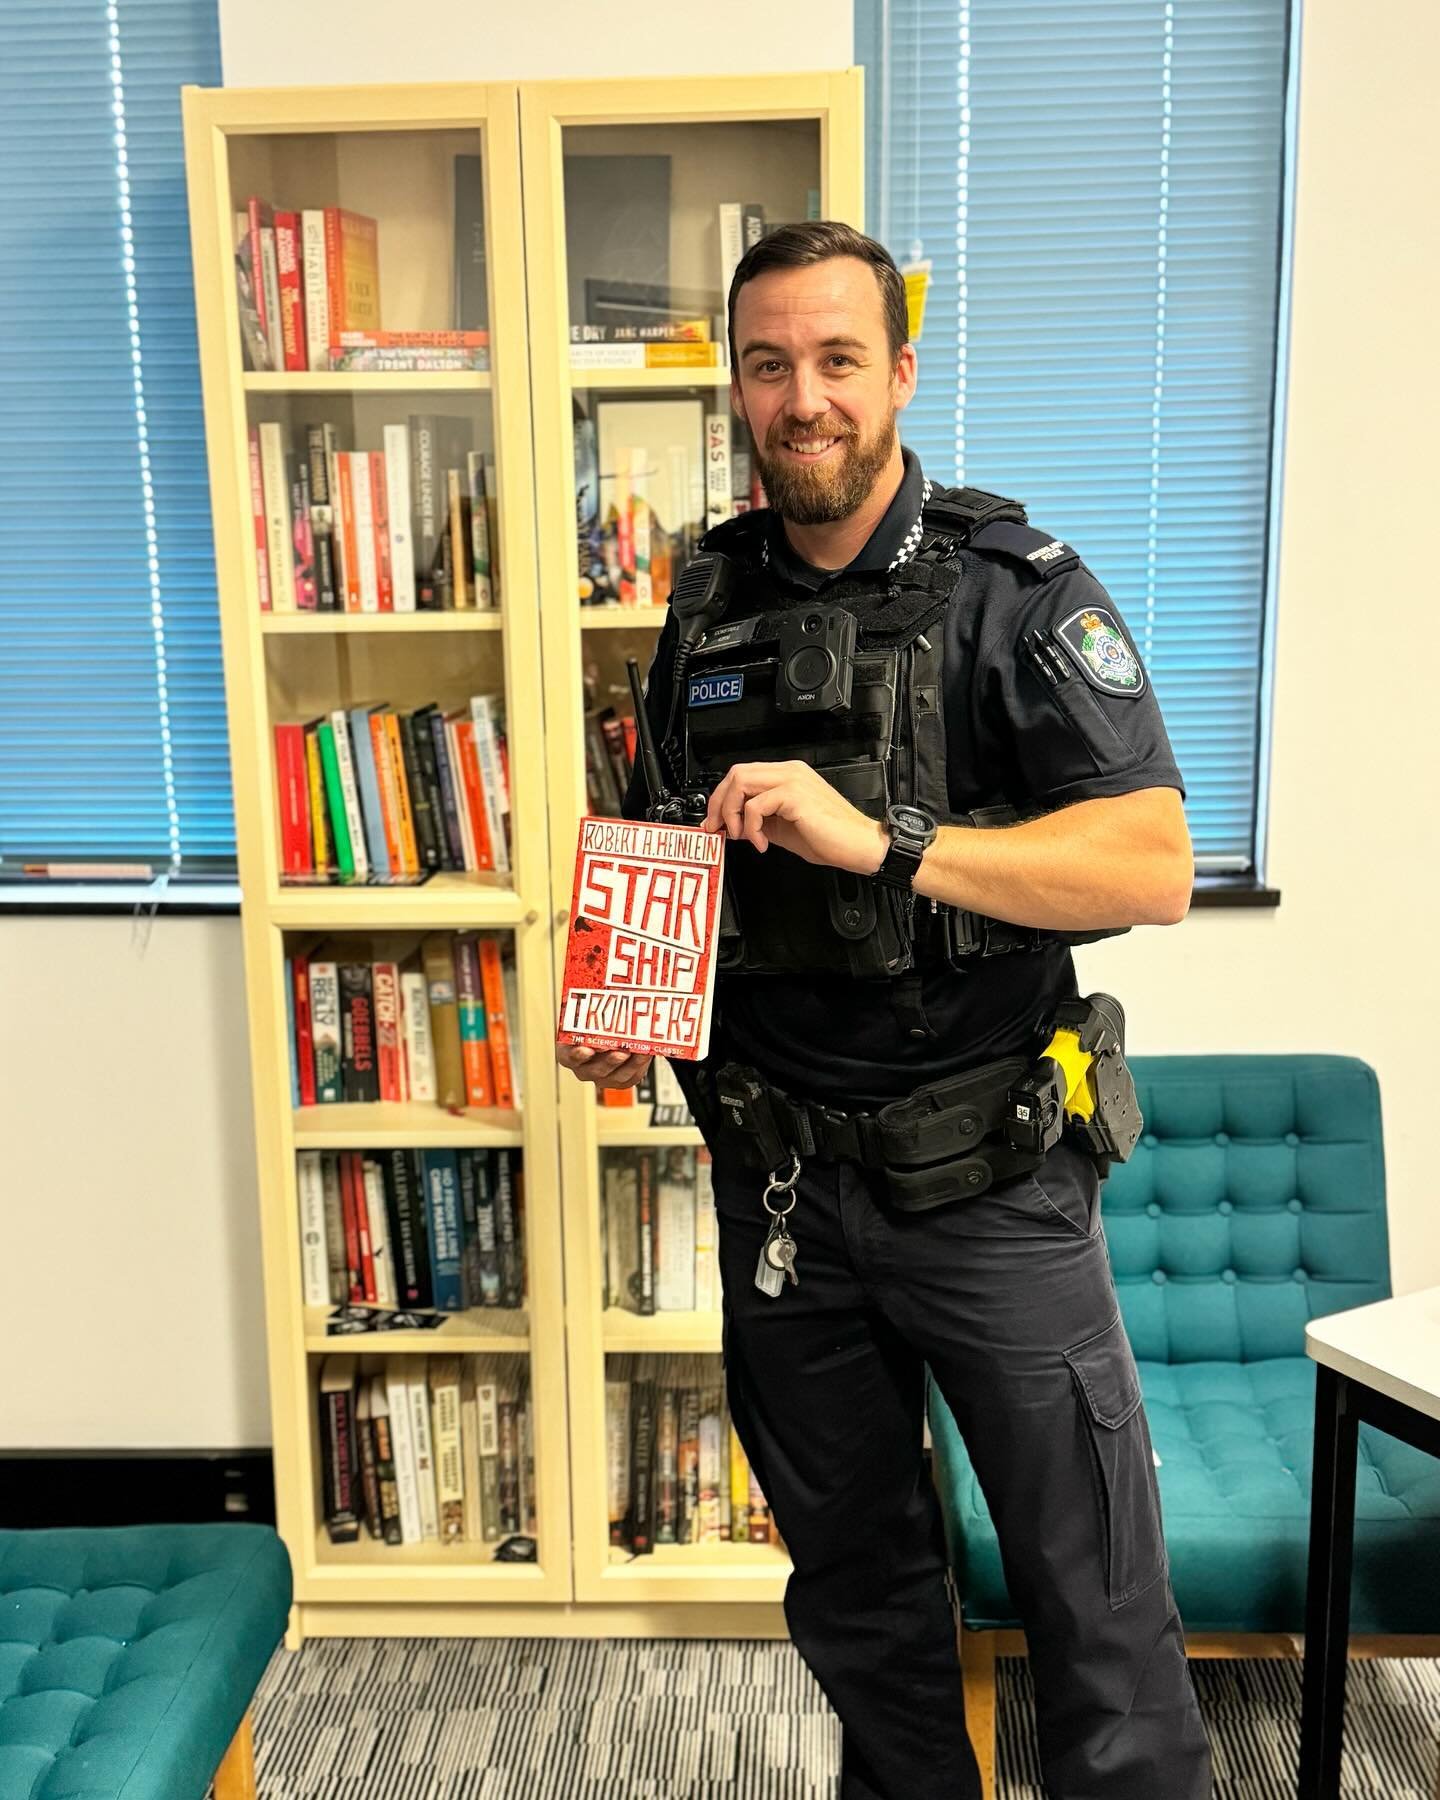 📚 NEW POLICE COMMUNITY LIBRARY 📚 

After the week it has been, we are very proud to support and open this community library here in a Brisbane police station.

Reading is not only is a proven means to reducing stress but also in increasing empathy,